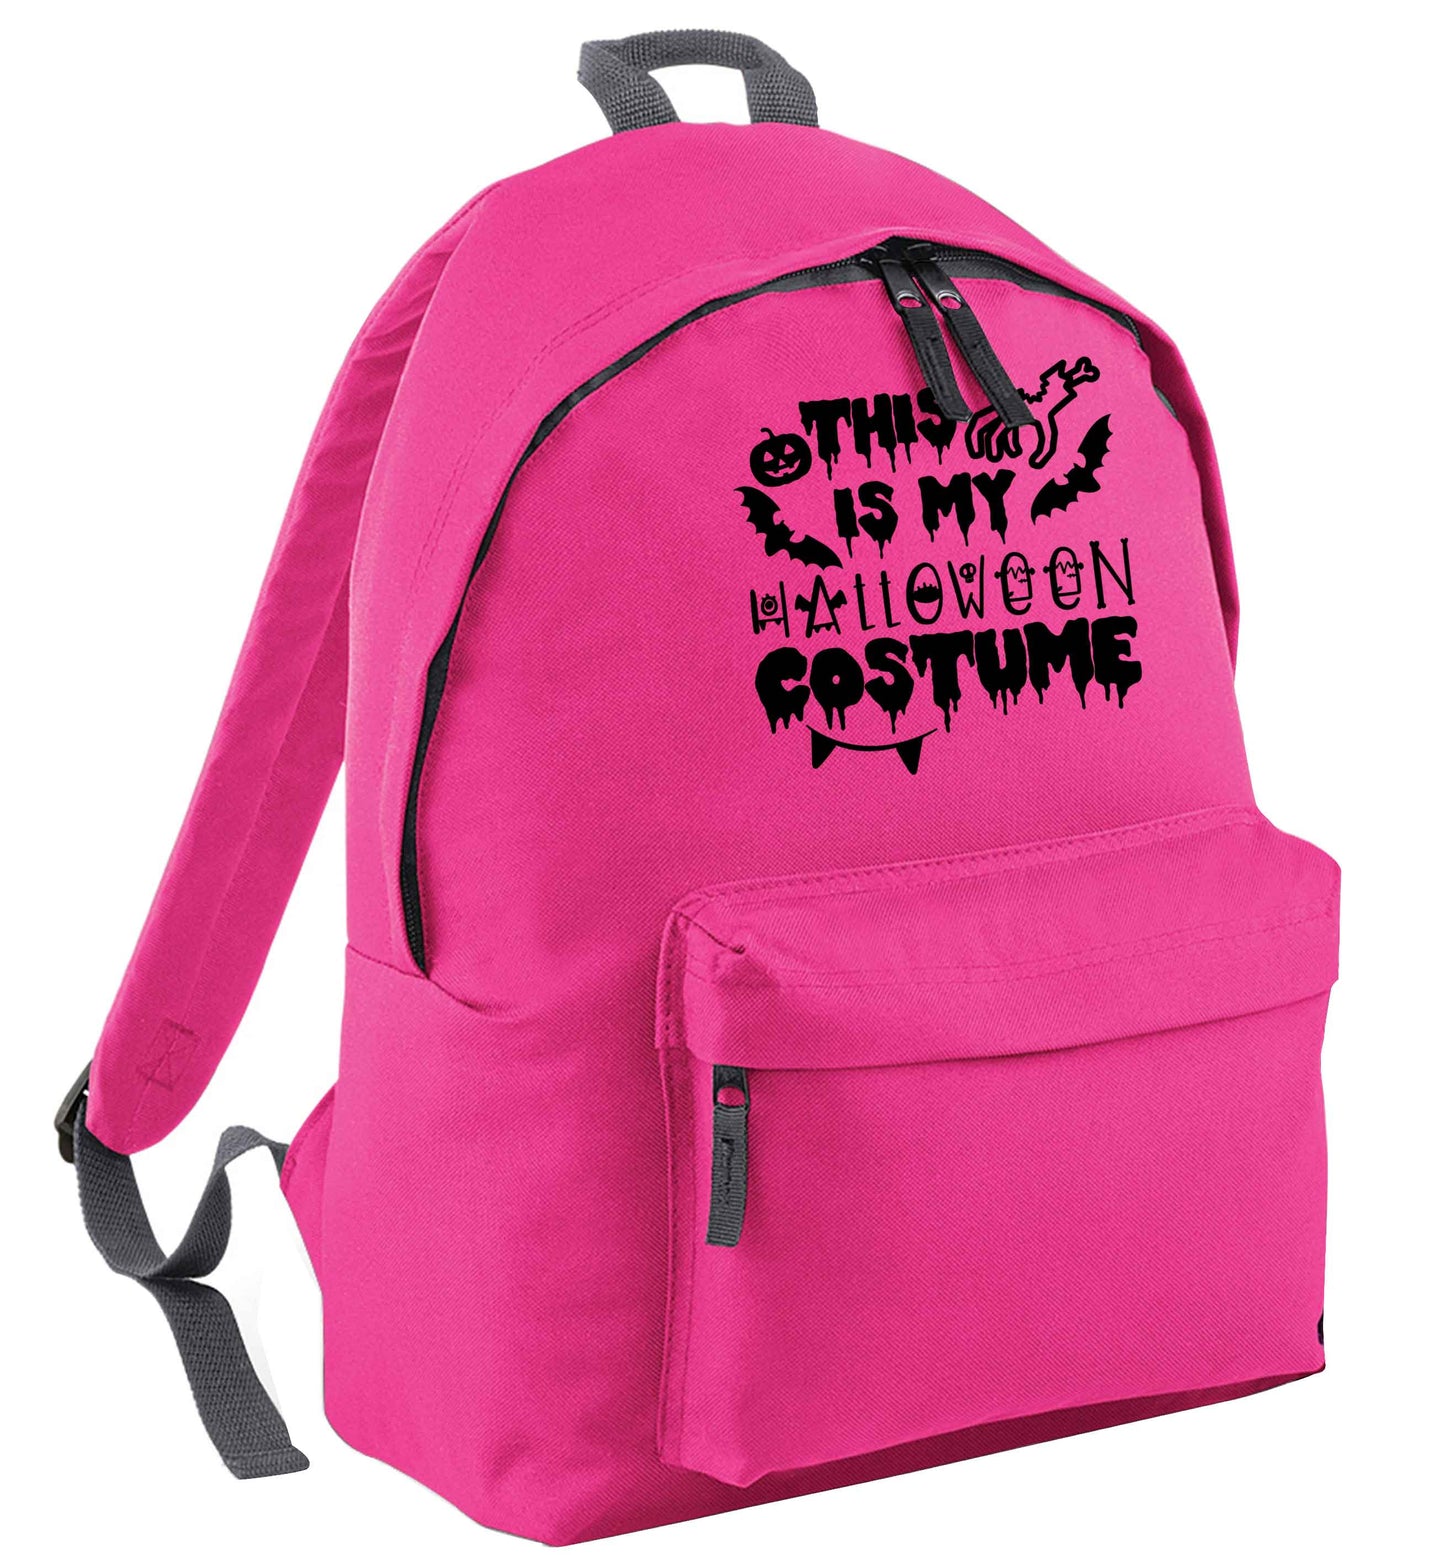 This is my halloween costume pink adults backpack